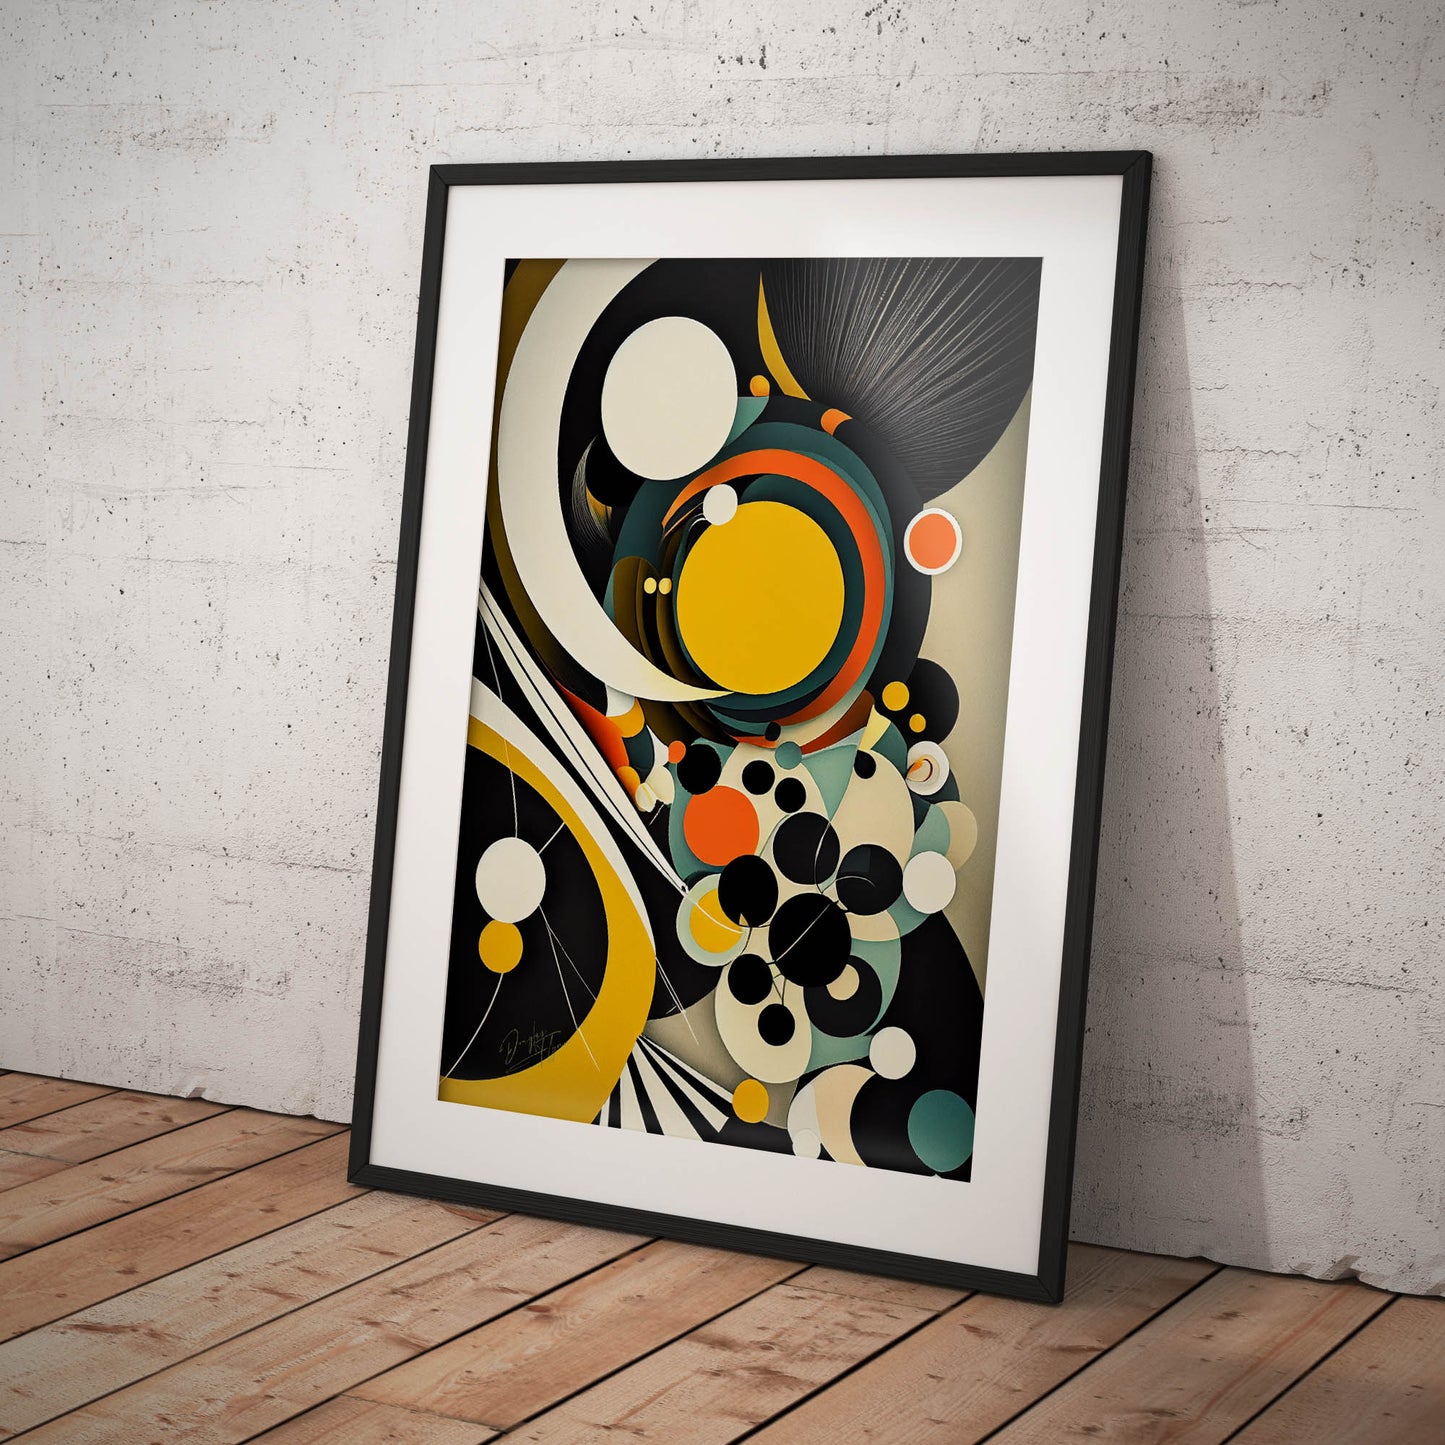 "Vibrant Chaos of Color and Form retro poster